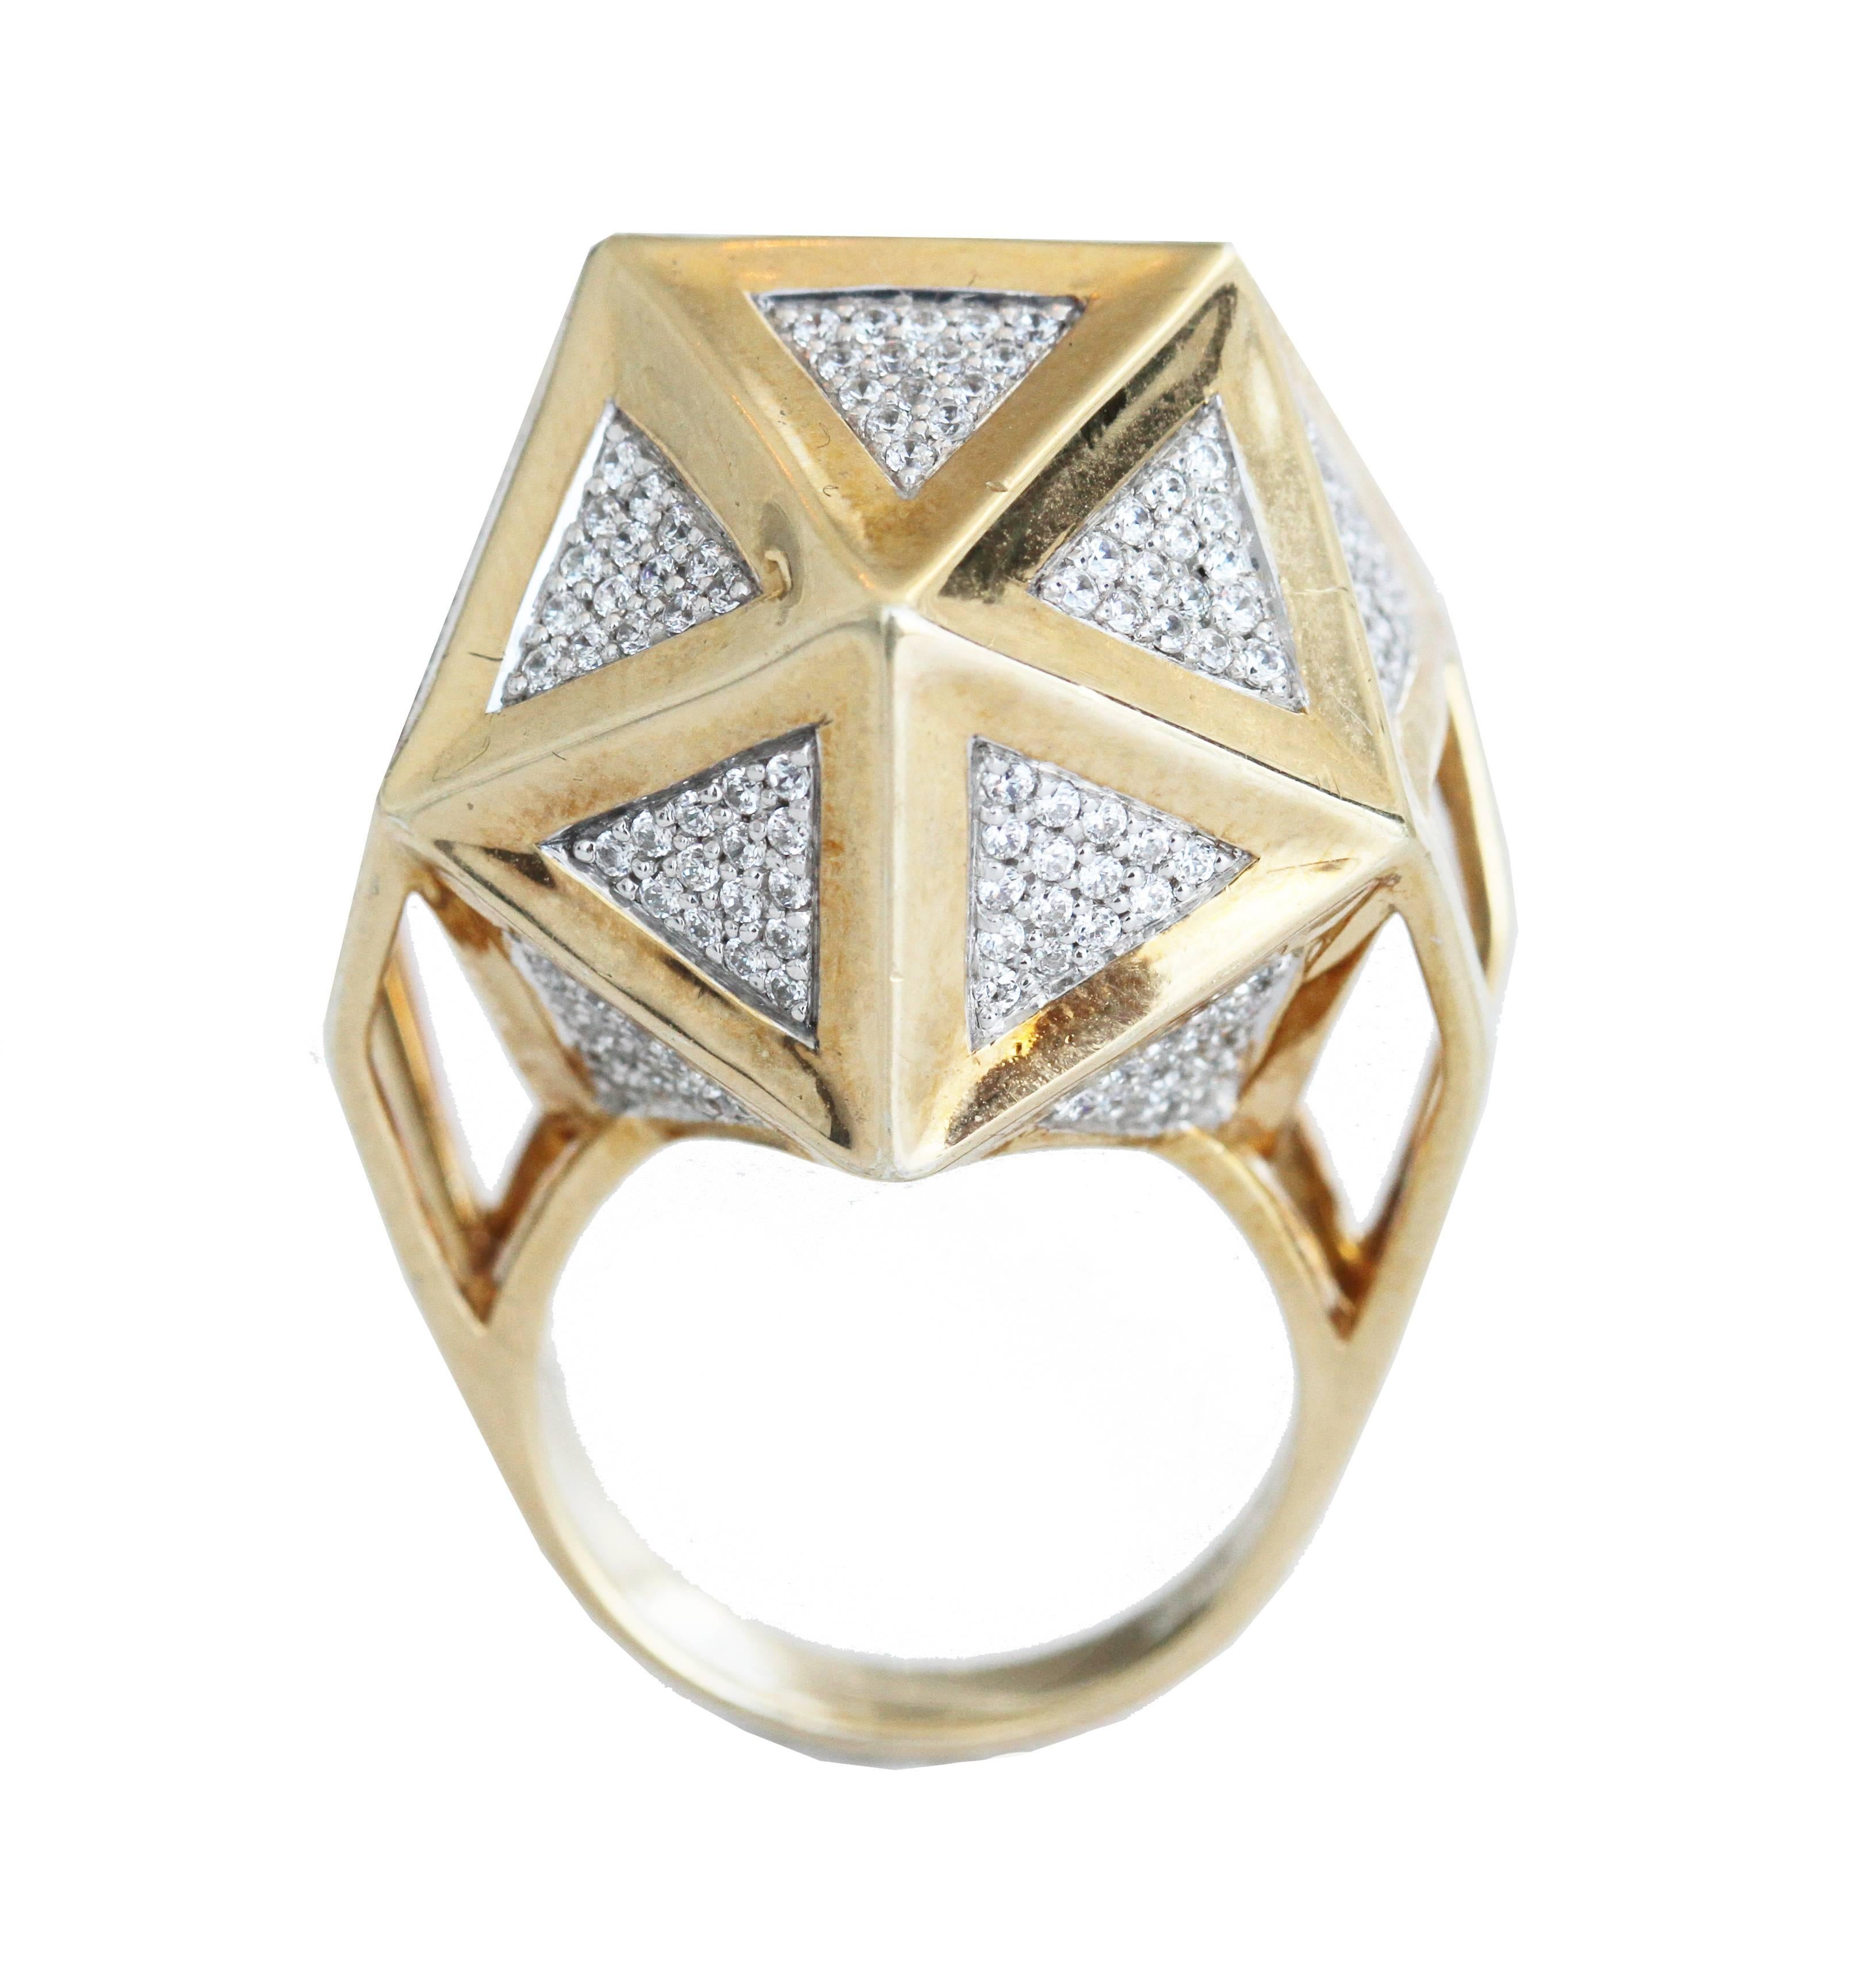 One of a Kind Large Icoso White Diamonds 18K Gold Ring In New Condition For Sale In Coral Gables, FL